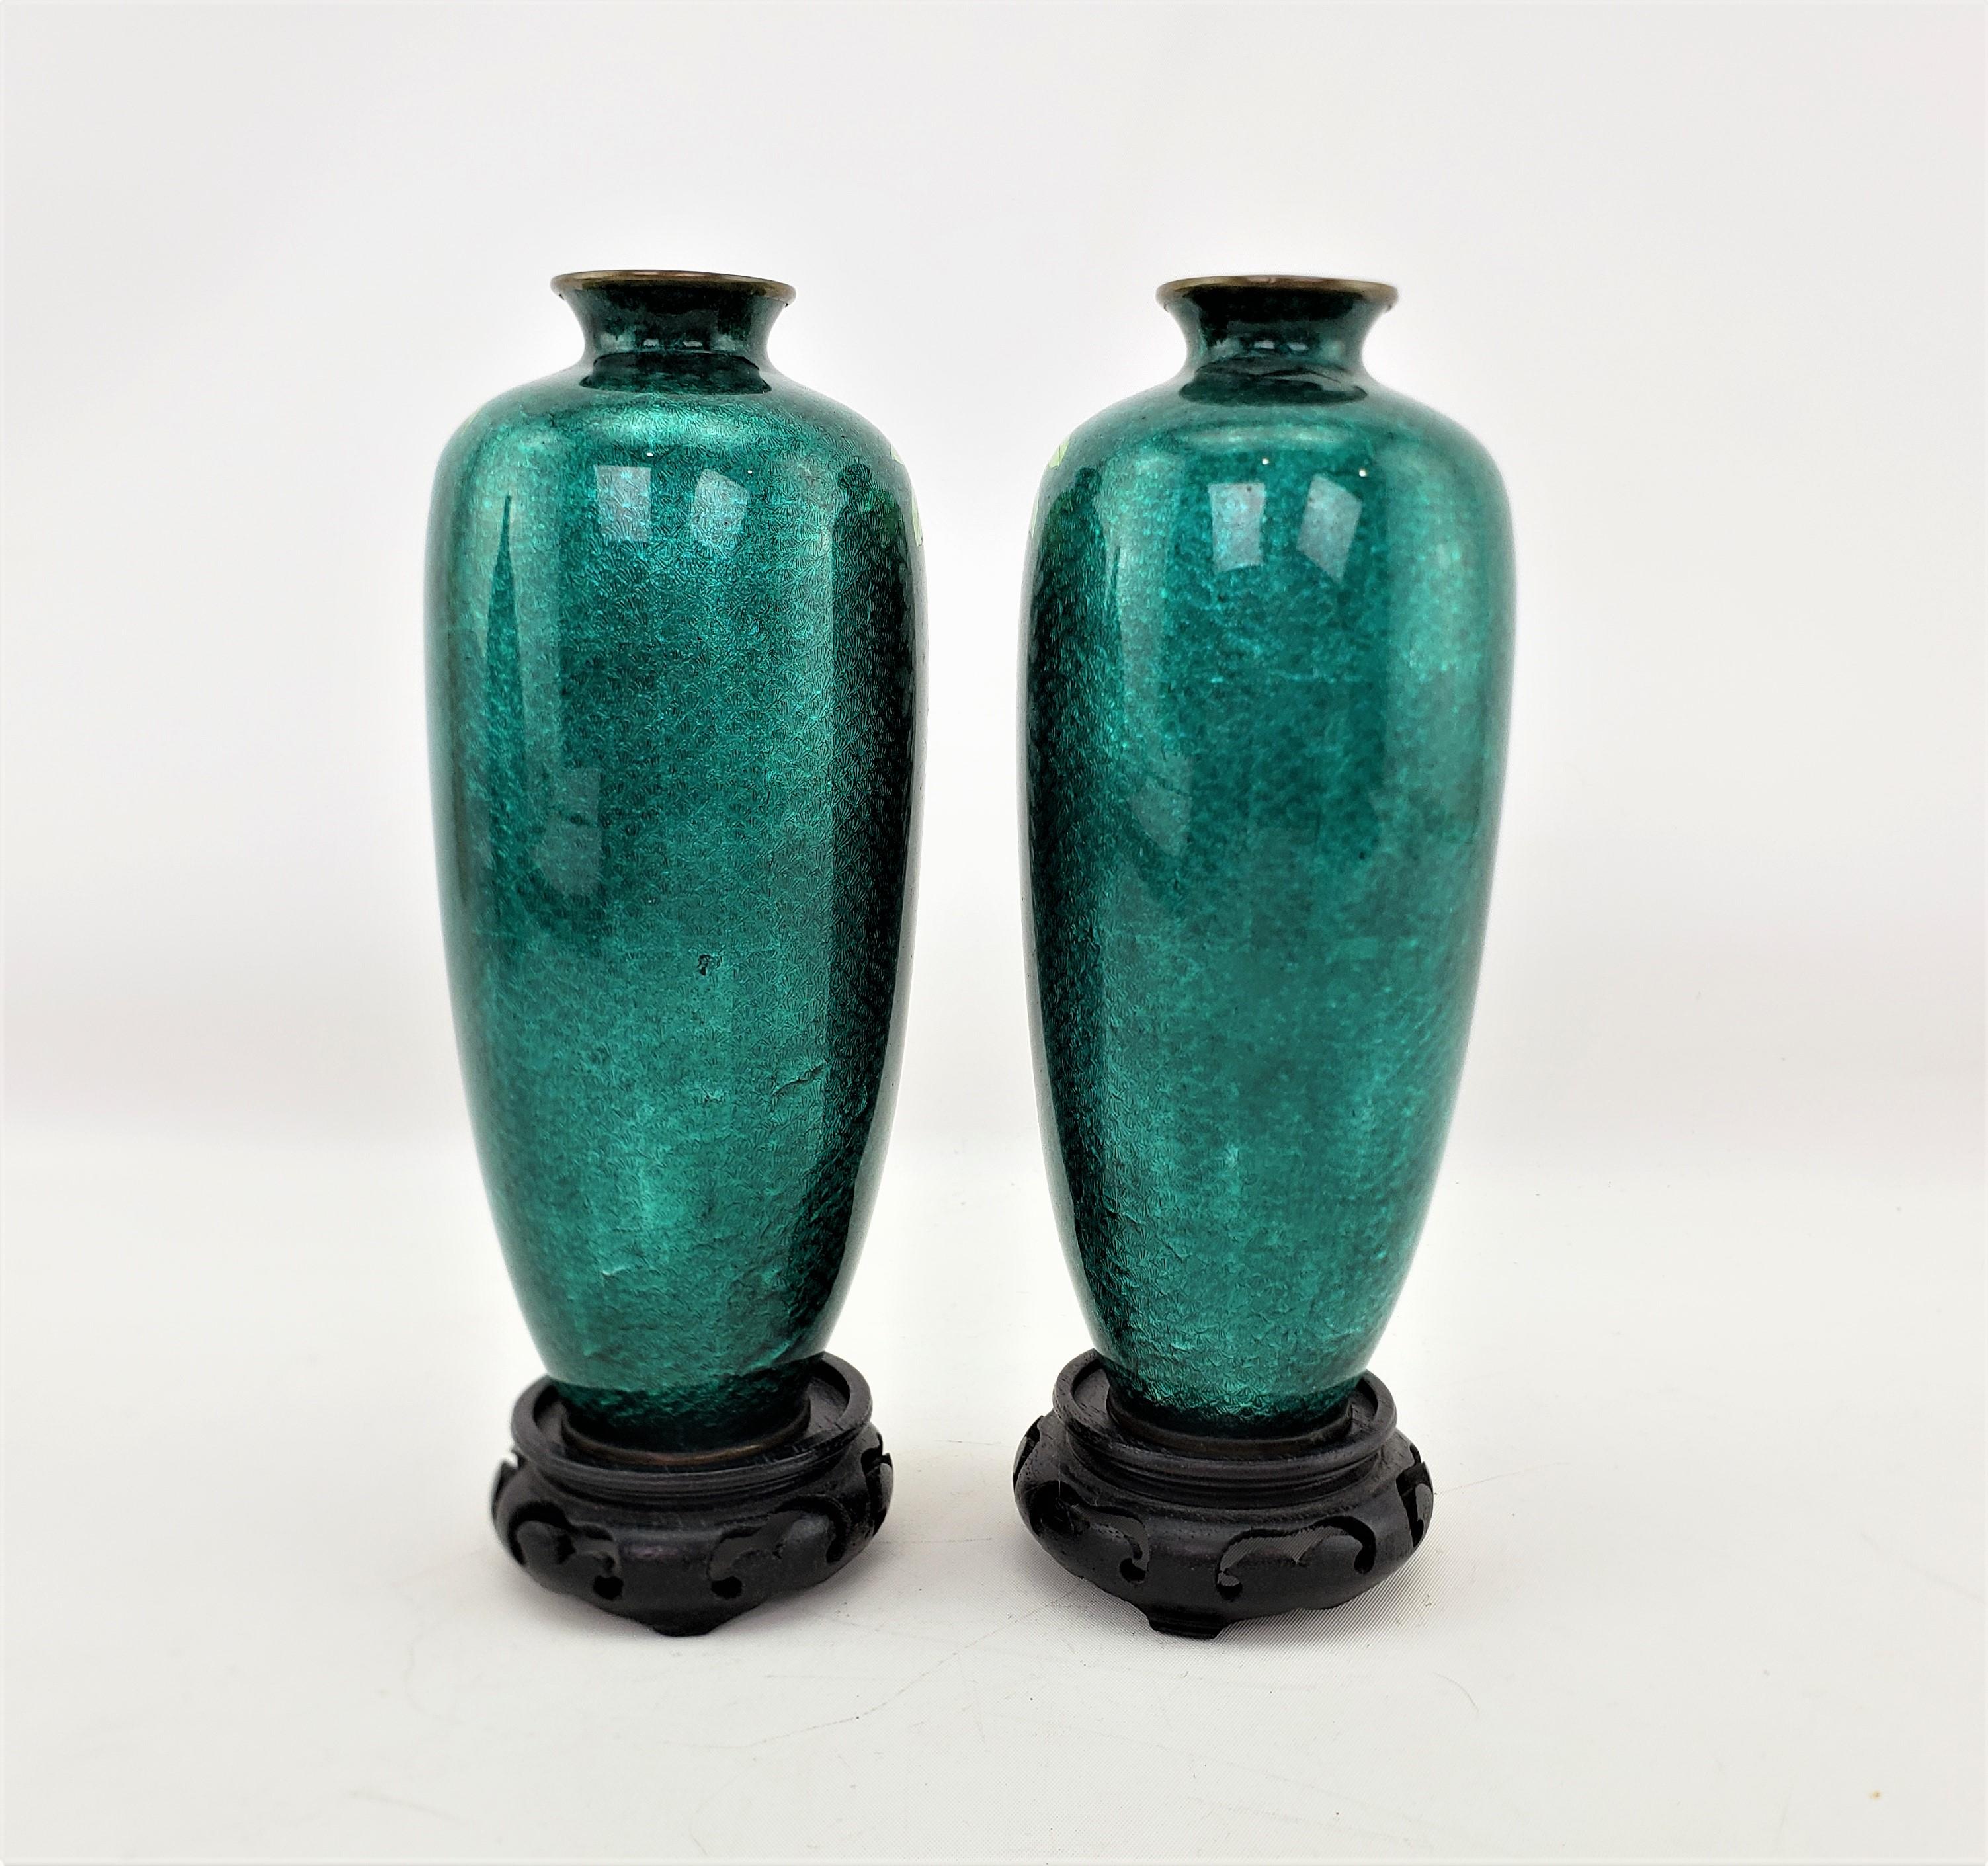 20th Century Pair of Antique Japanese Cloisonne Vases with Floral Decoration & Wooden Stands For Sale